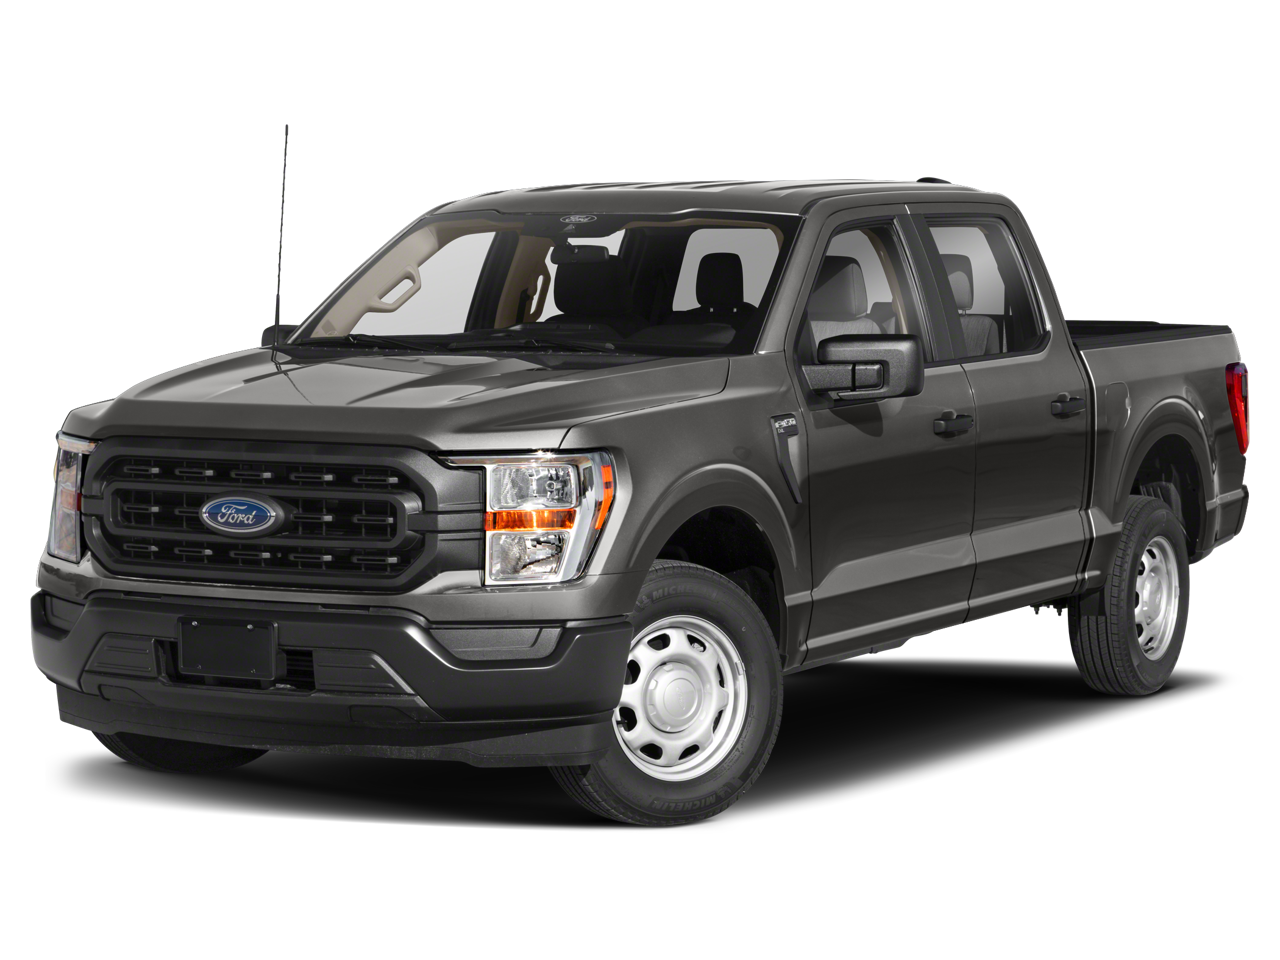 2022 Ford F-150 XLT Luxury Package 5.0 V8